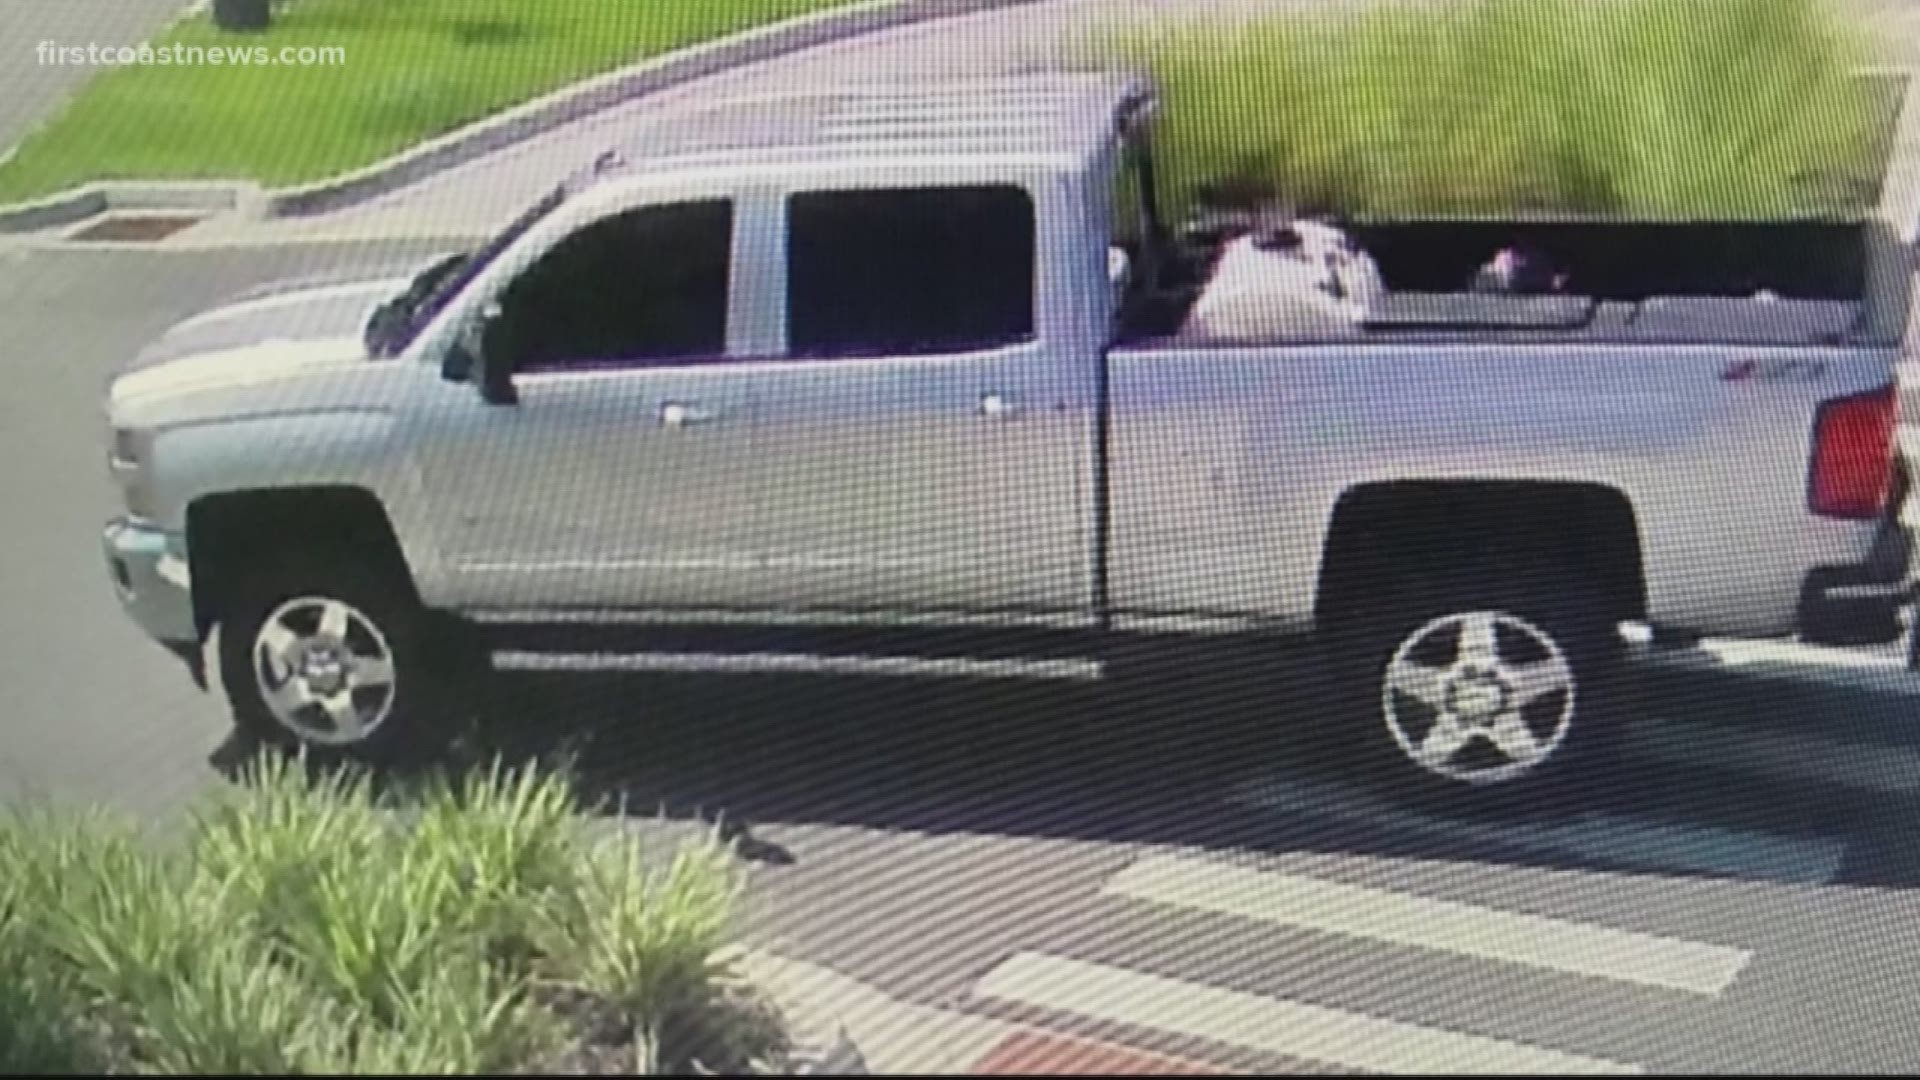 The St. Johns County Sheriff's Office is searching for a man who witnesses say took off in his truck after dragging a female with him.